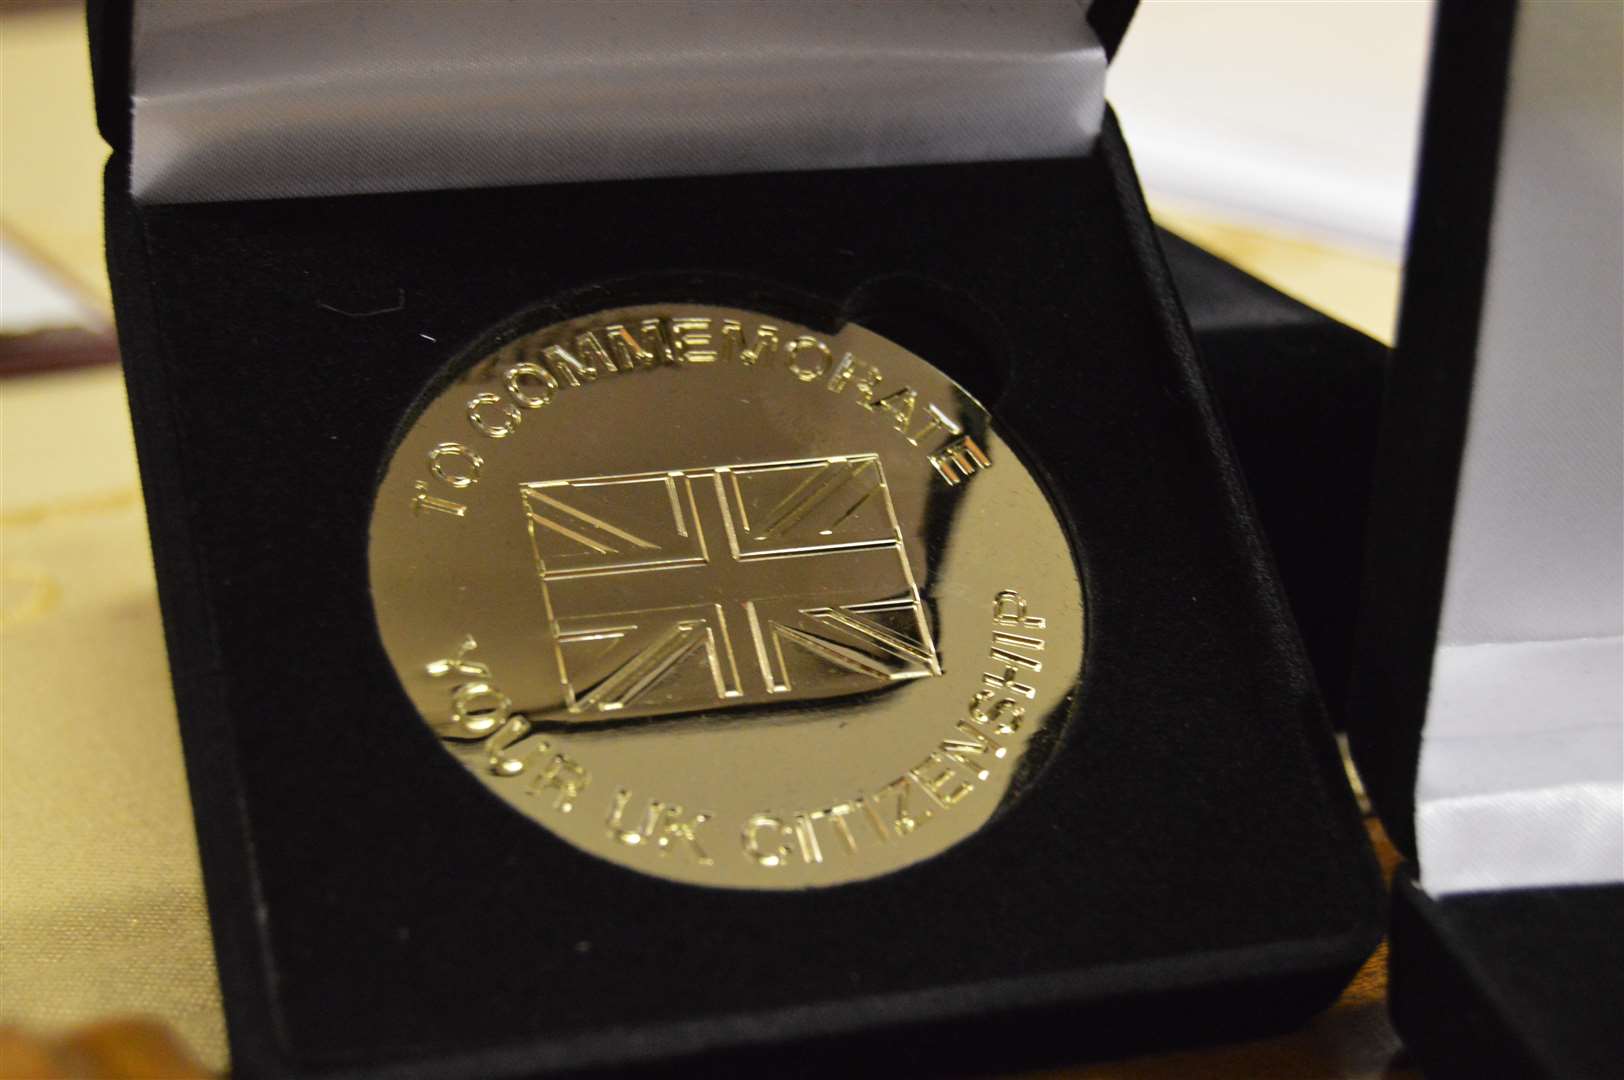 The commemorative medal presented to the new UK citizens.